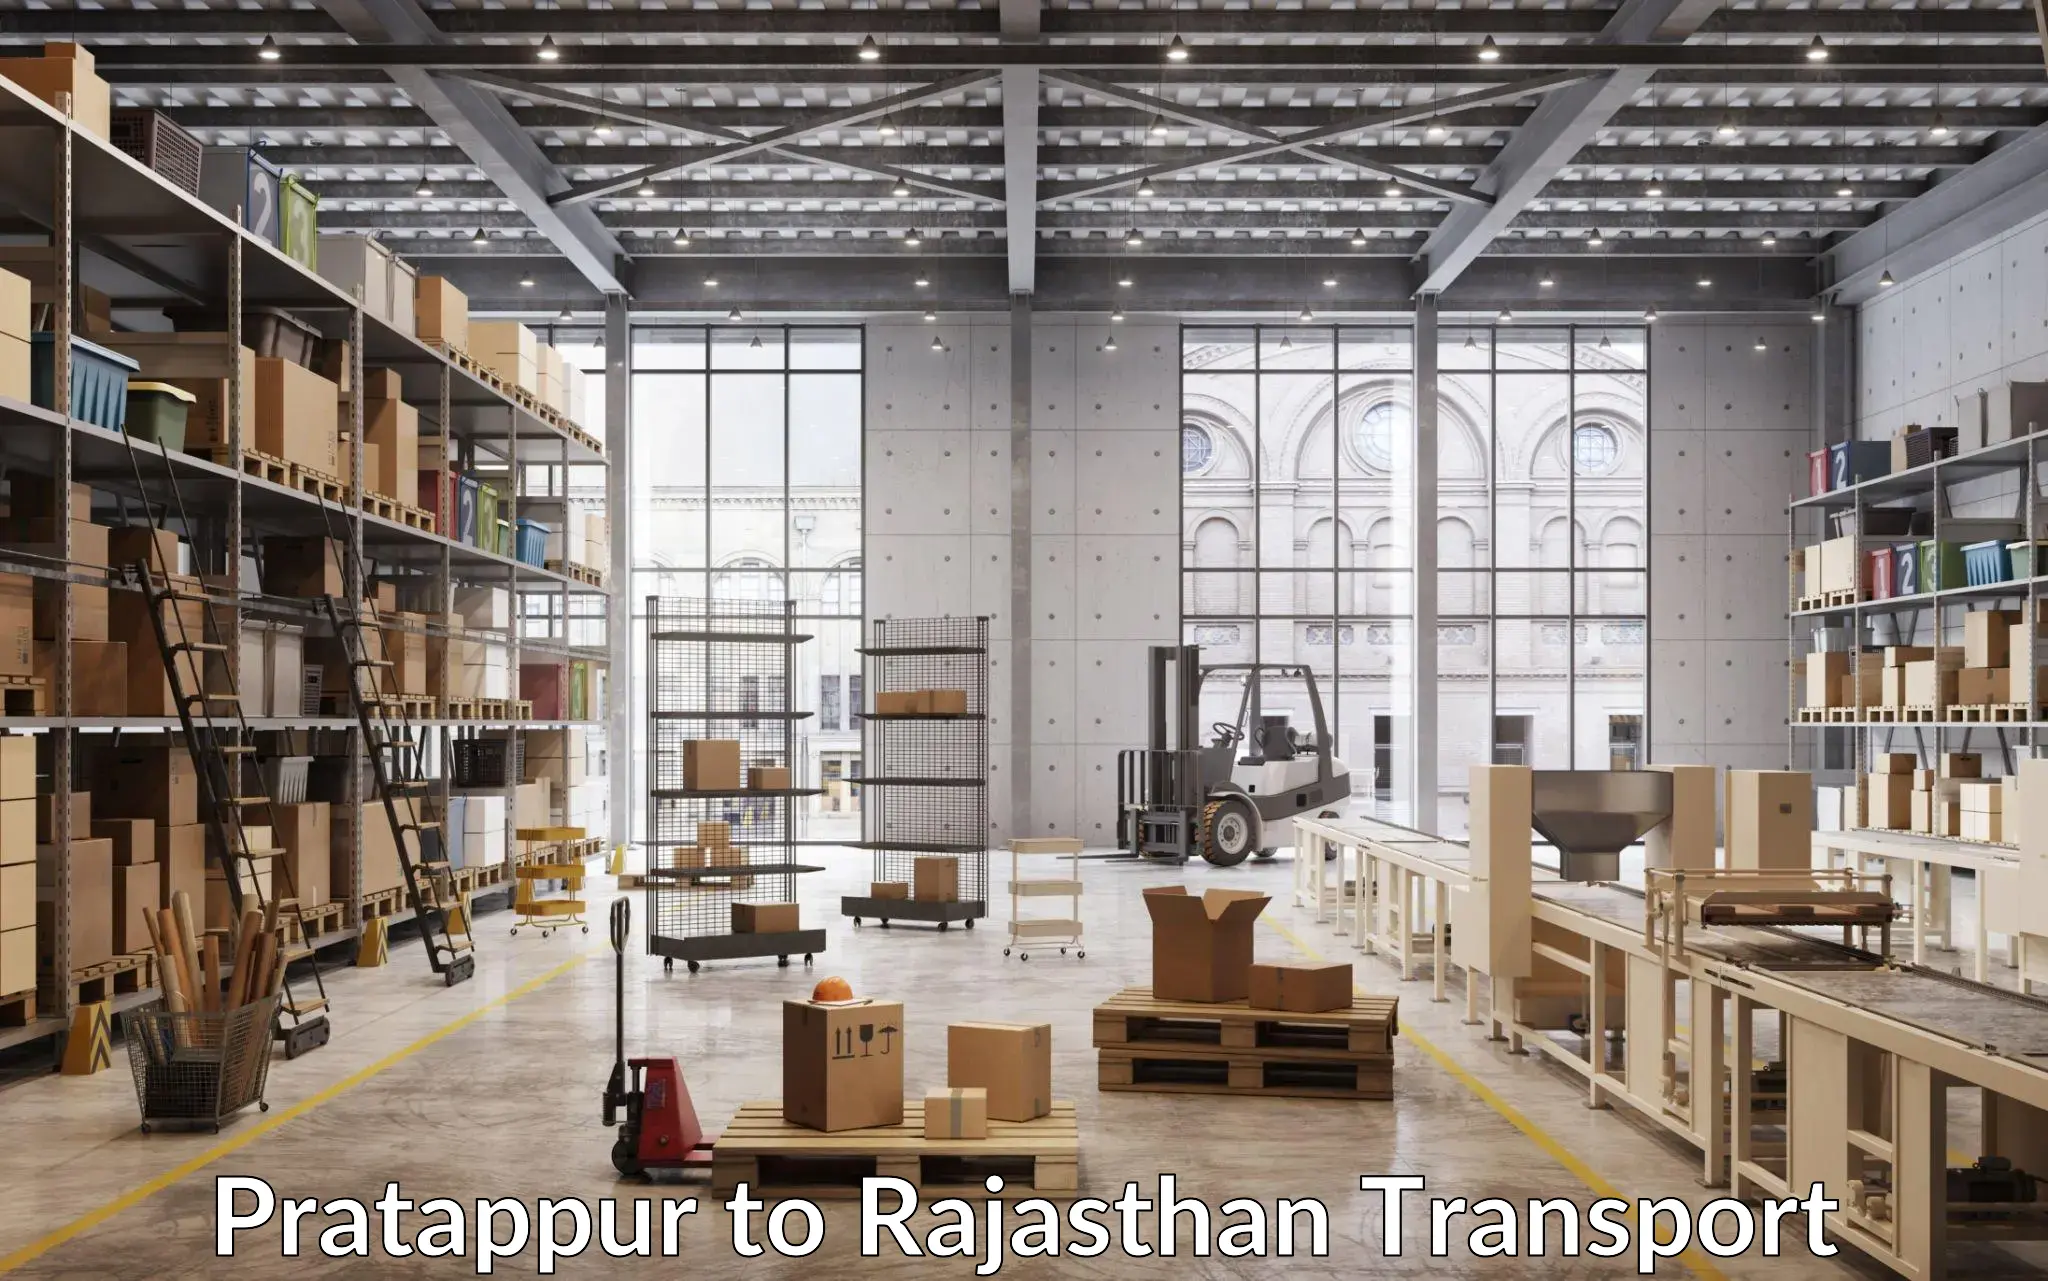 Truck transport companies in India Pratappur to Rajasthan